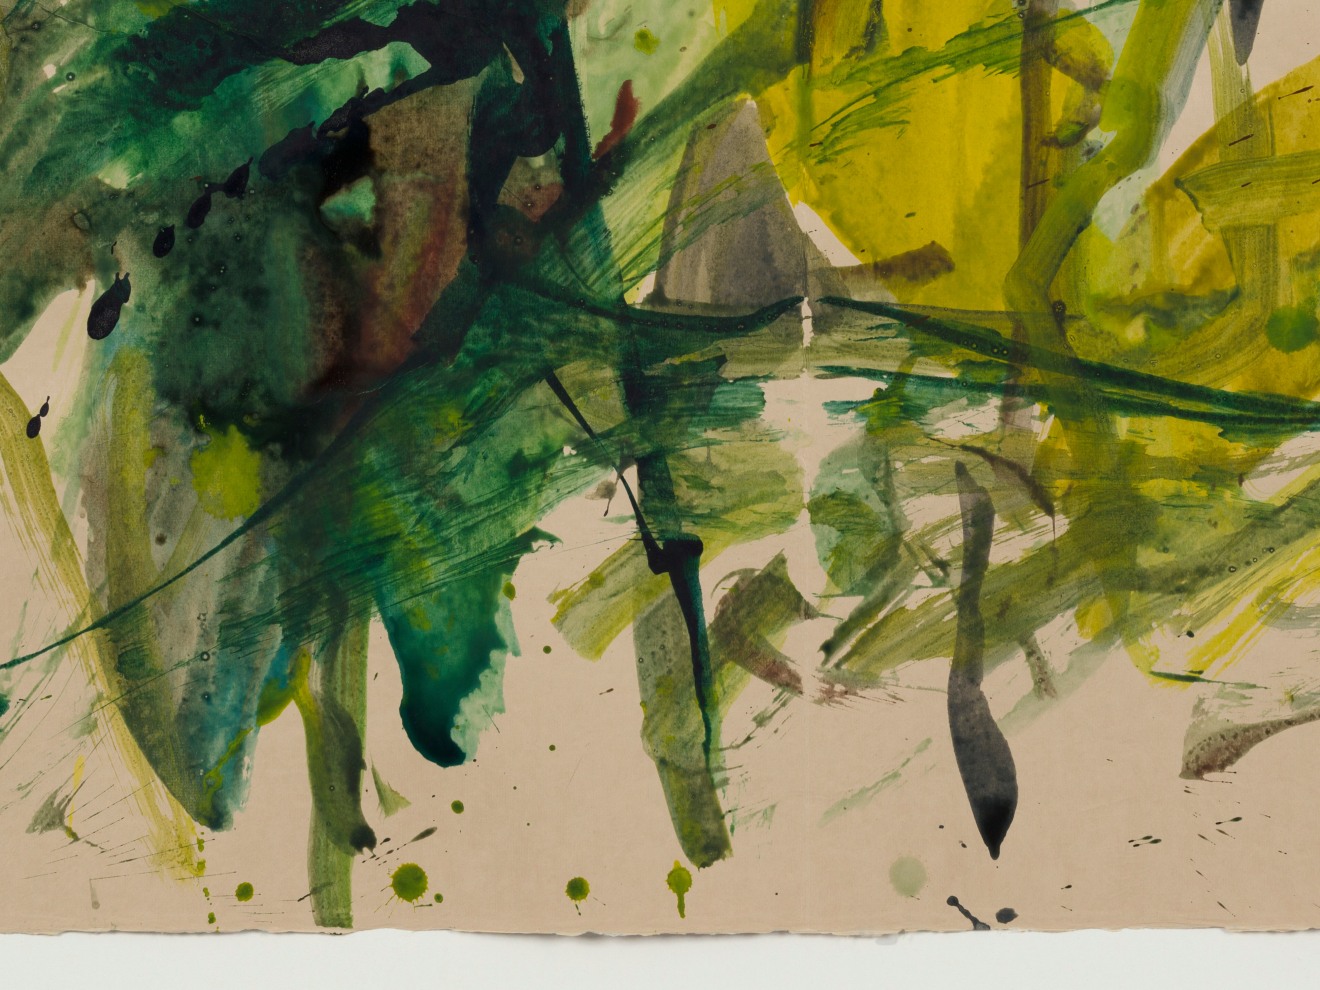 Mary Weatherford, In the cedar forest, 2019